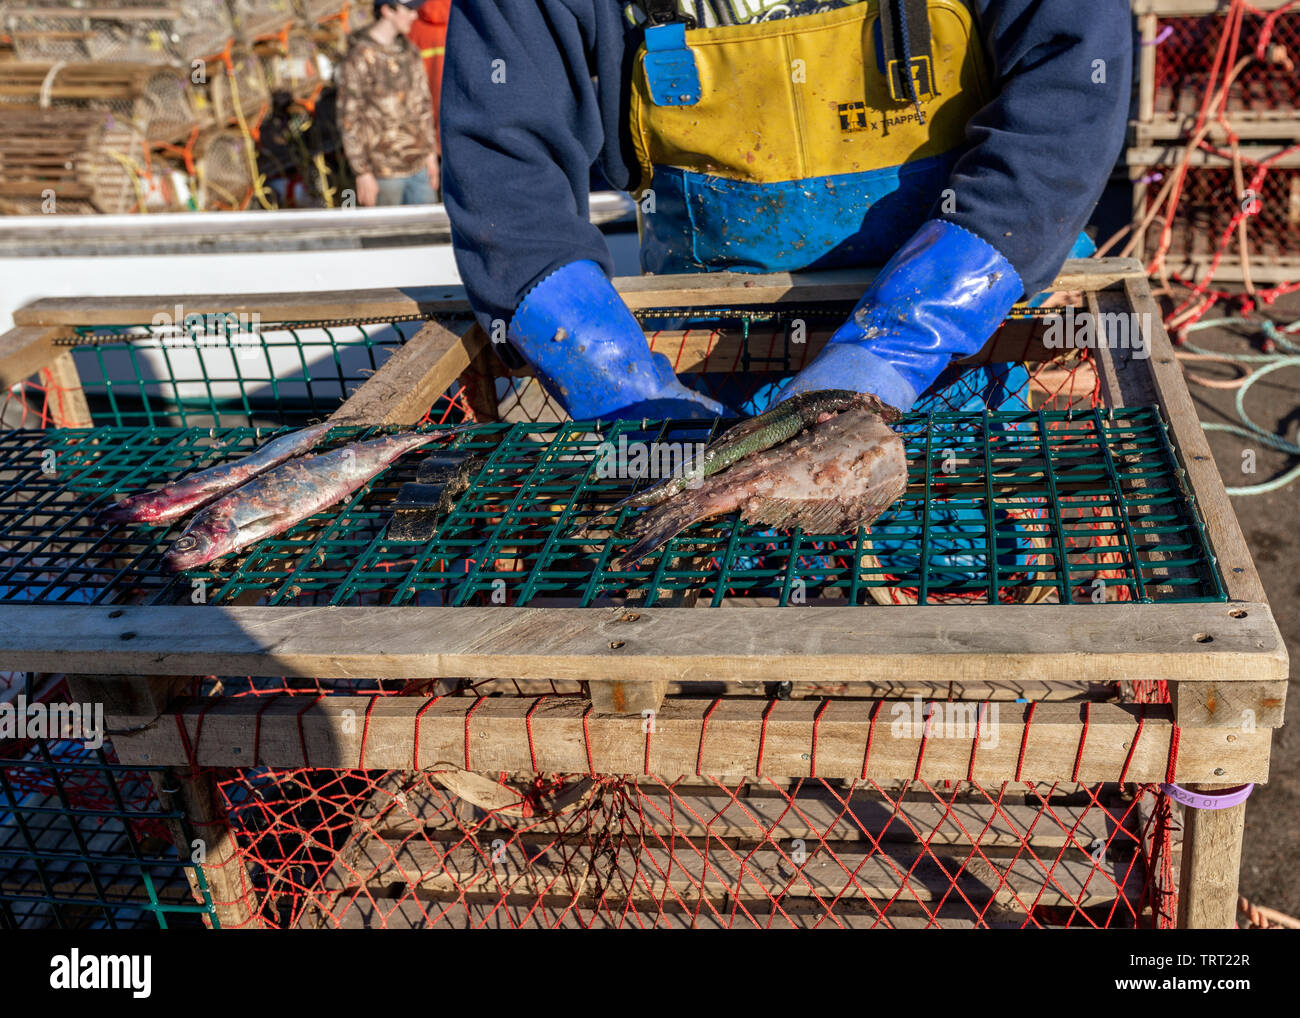 Fisherman baiting a lobster trap with raw fish. Stock Photo